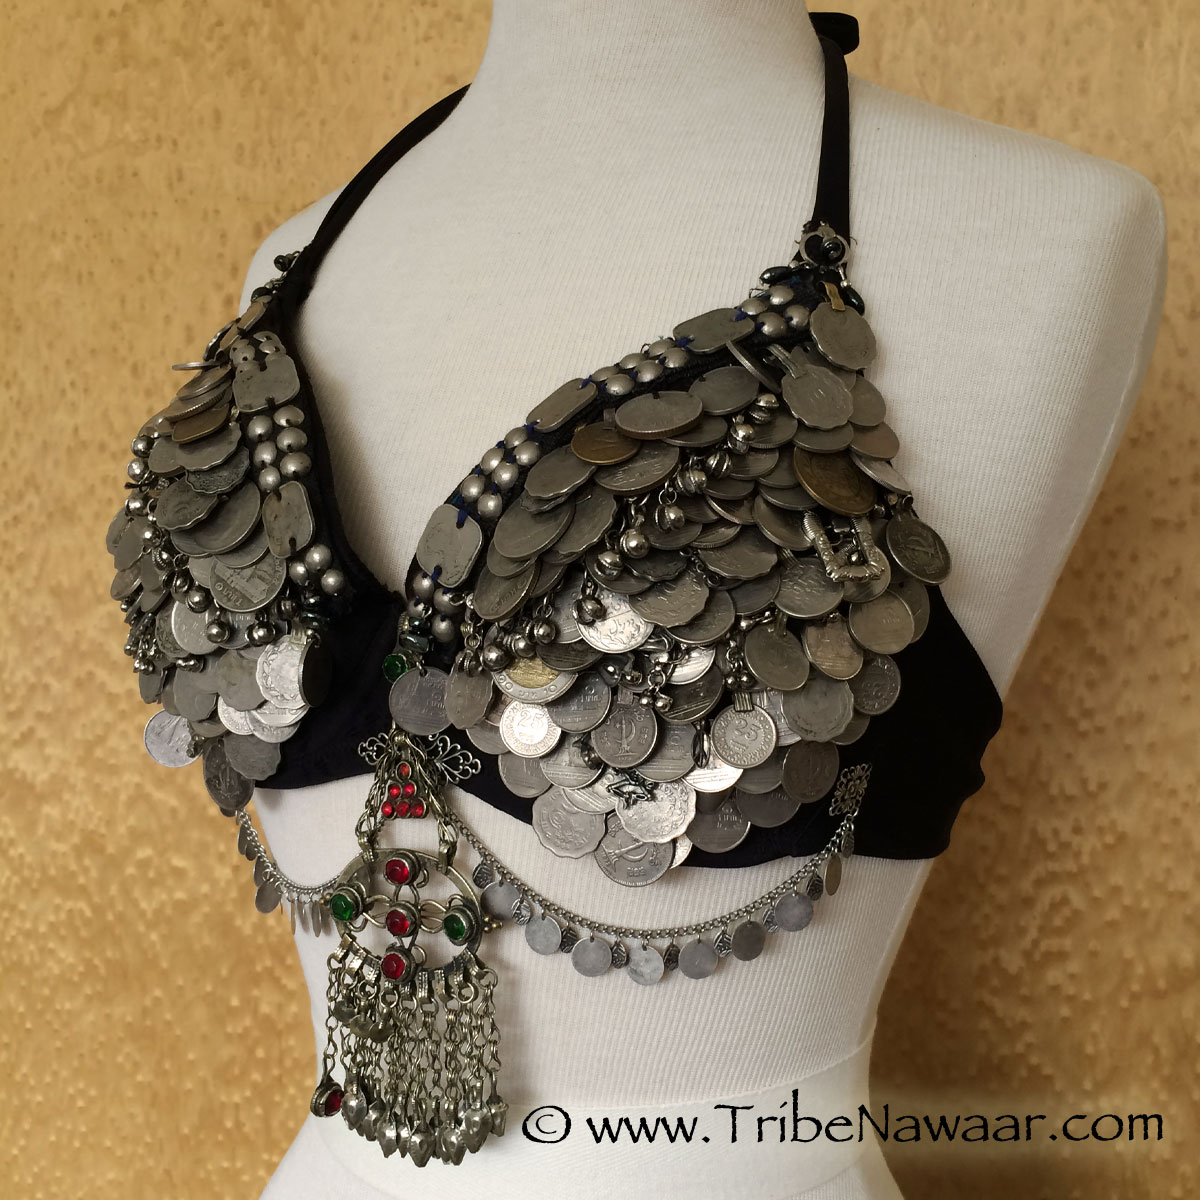 Tribal Coin Belly Dance Bra With Beads & Afghani Jewelry Accents -   Canada